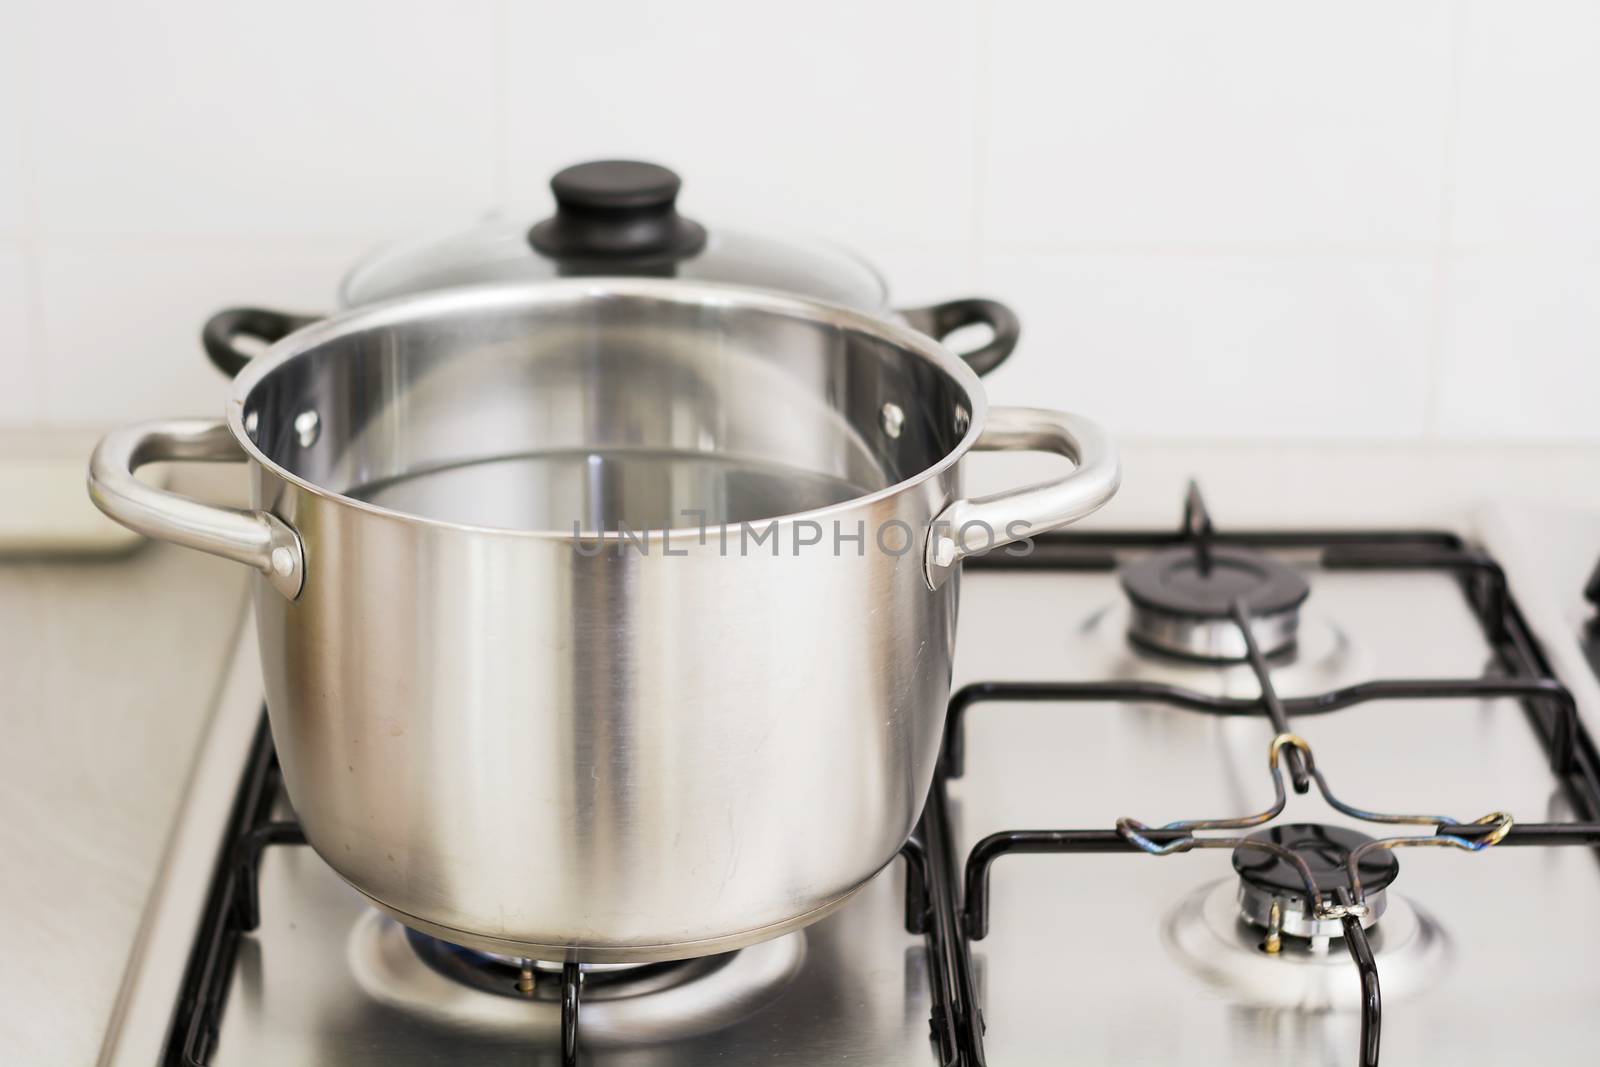 stainless steel cooking pot on gas stove by rarrarorro